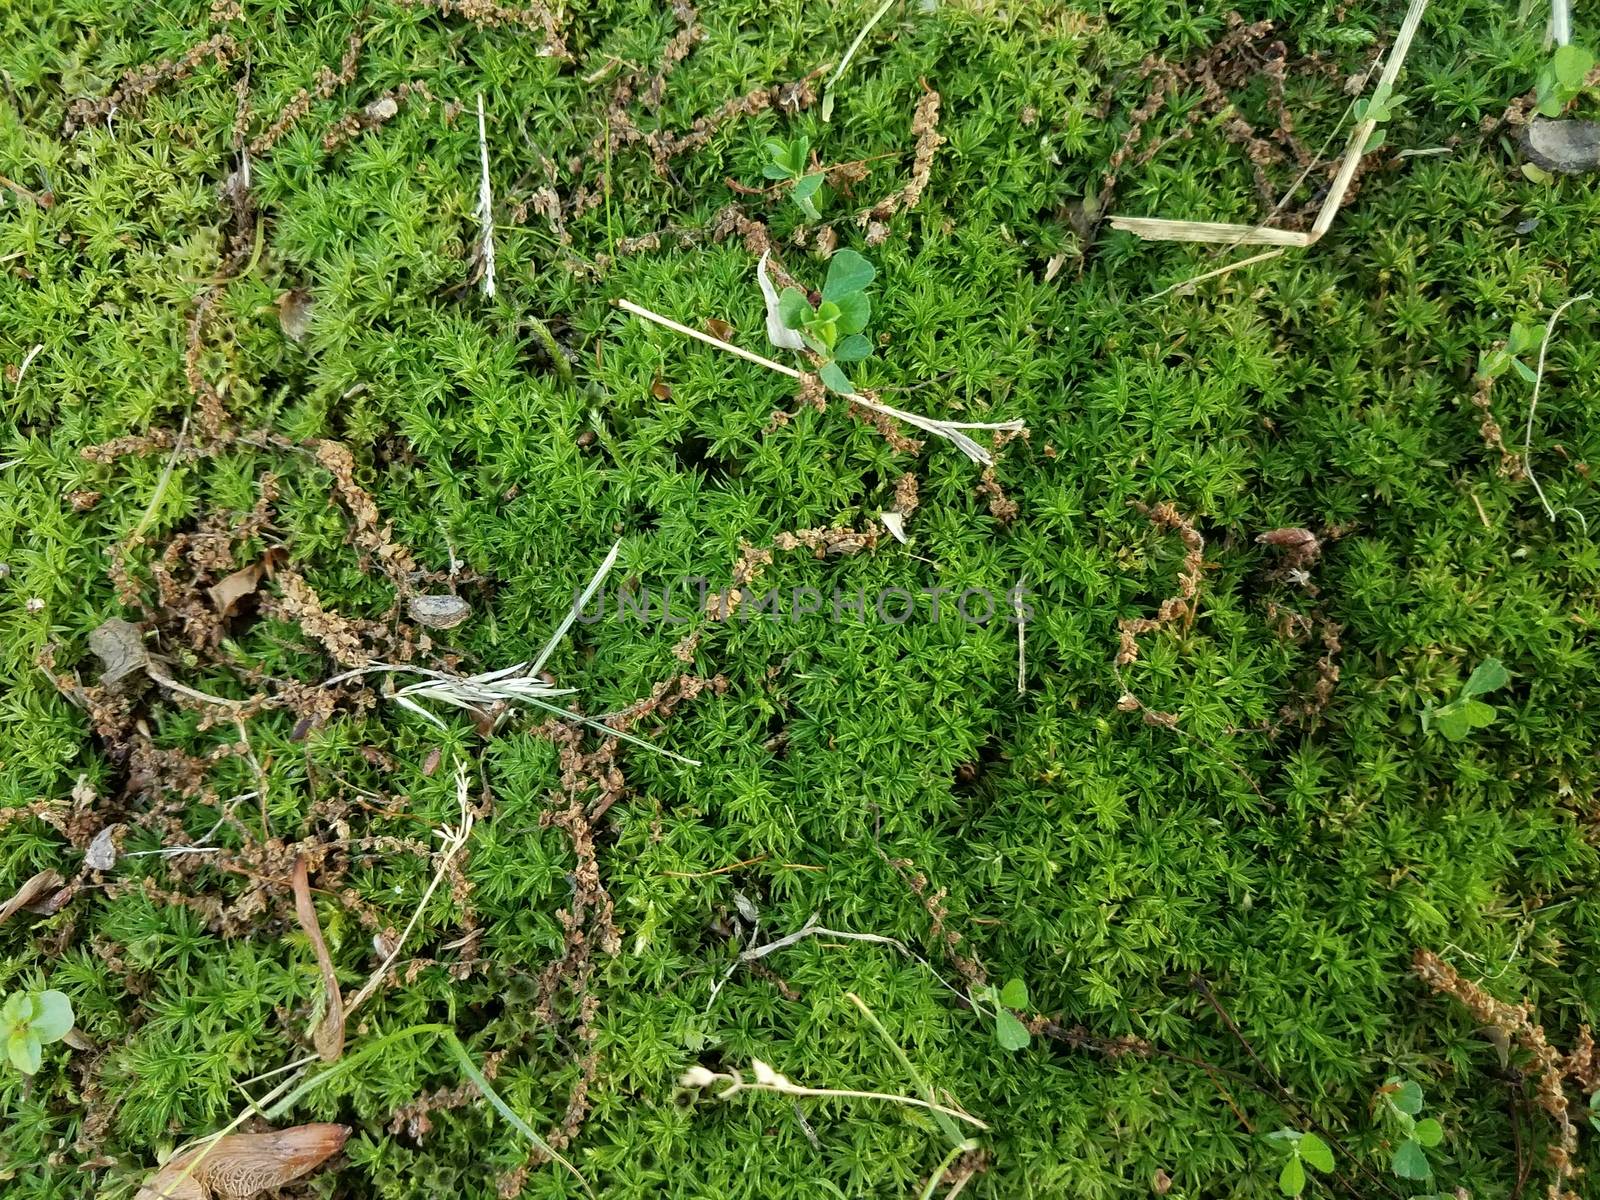 green moss and grass and weeds on ground outdoor by stockphotofan1